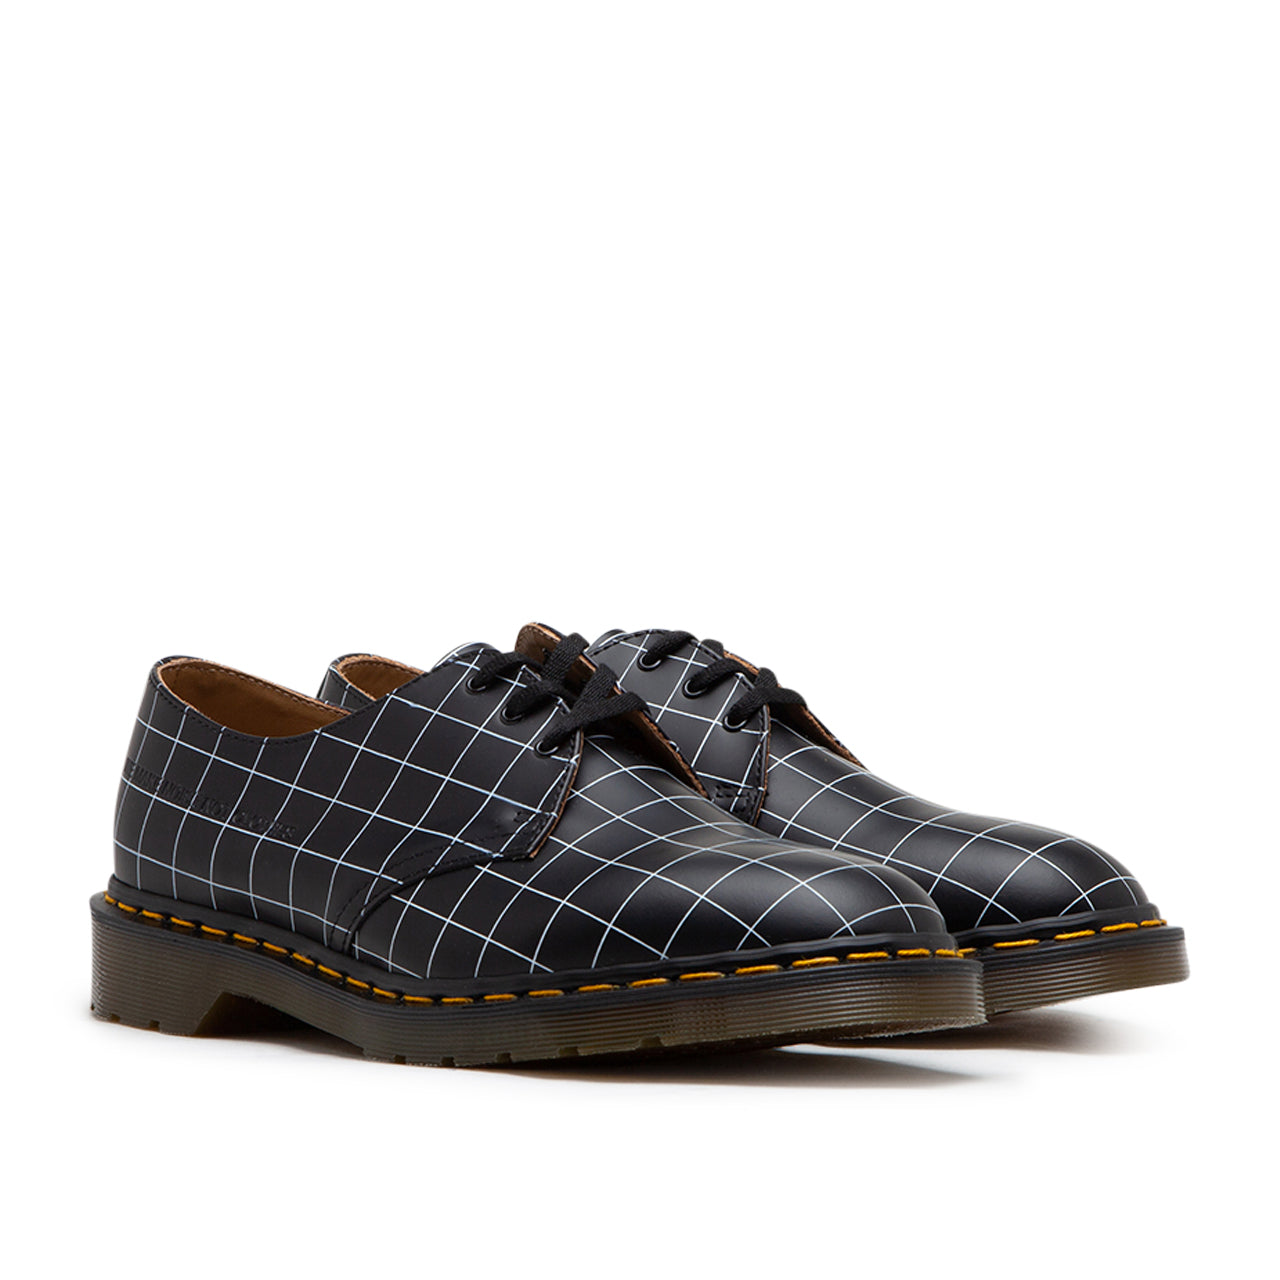 Rug Dictation pit Dr. Martens x Undercover 1461 Check Smooth (Black) - Allike Store